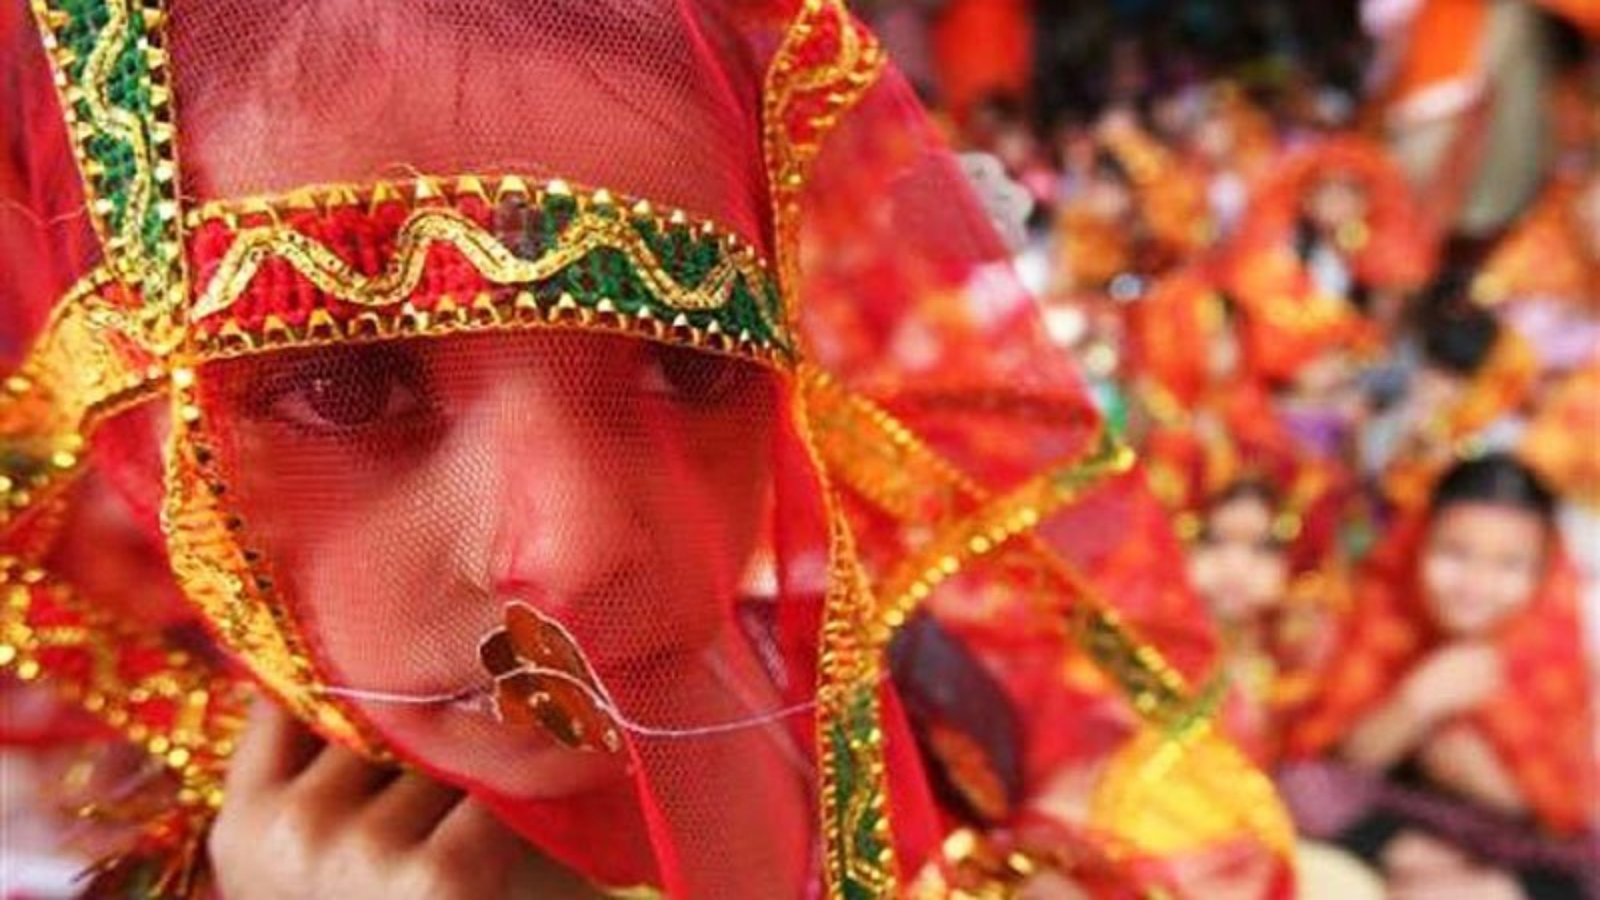 70-year-old man marries 13-year-old girl in Swat, arrest follows